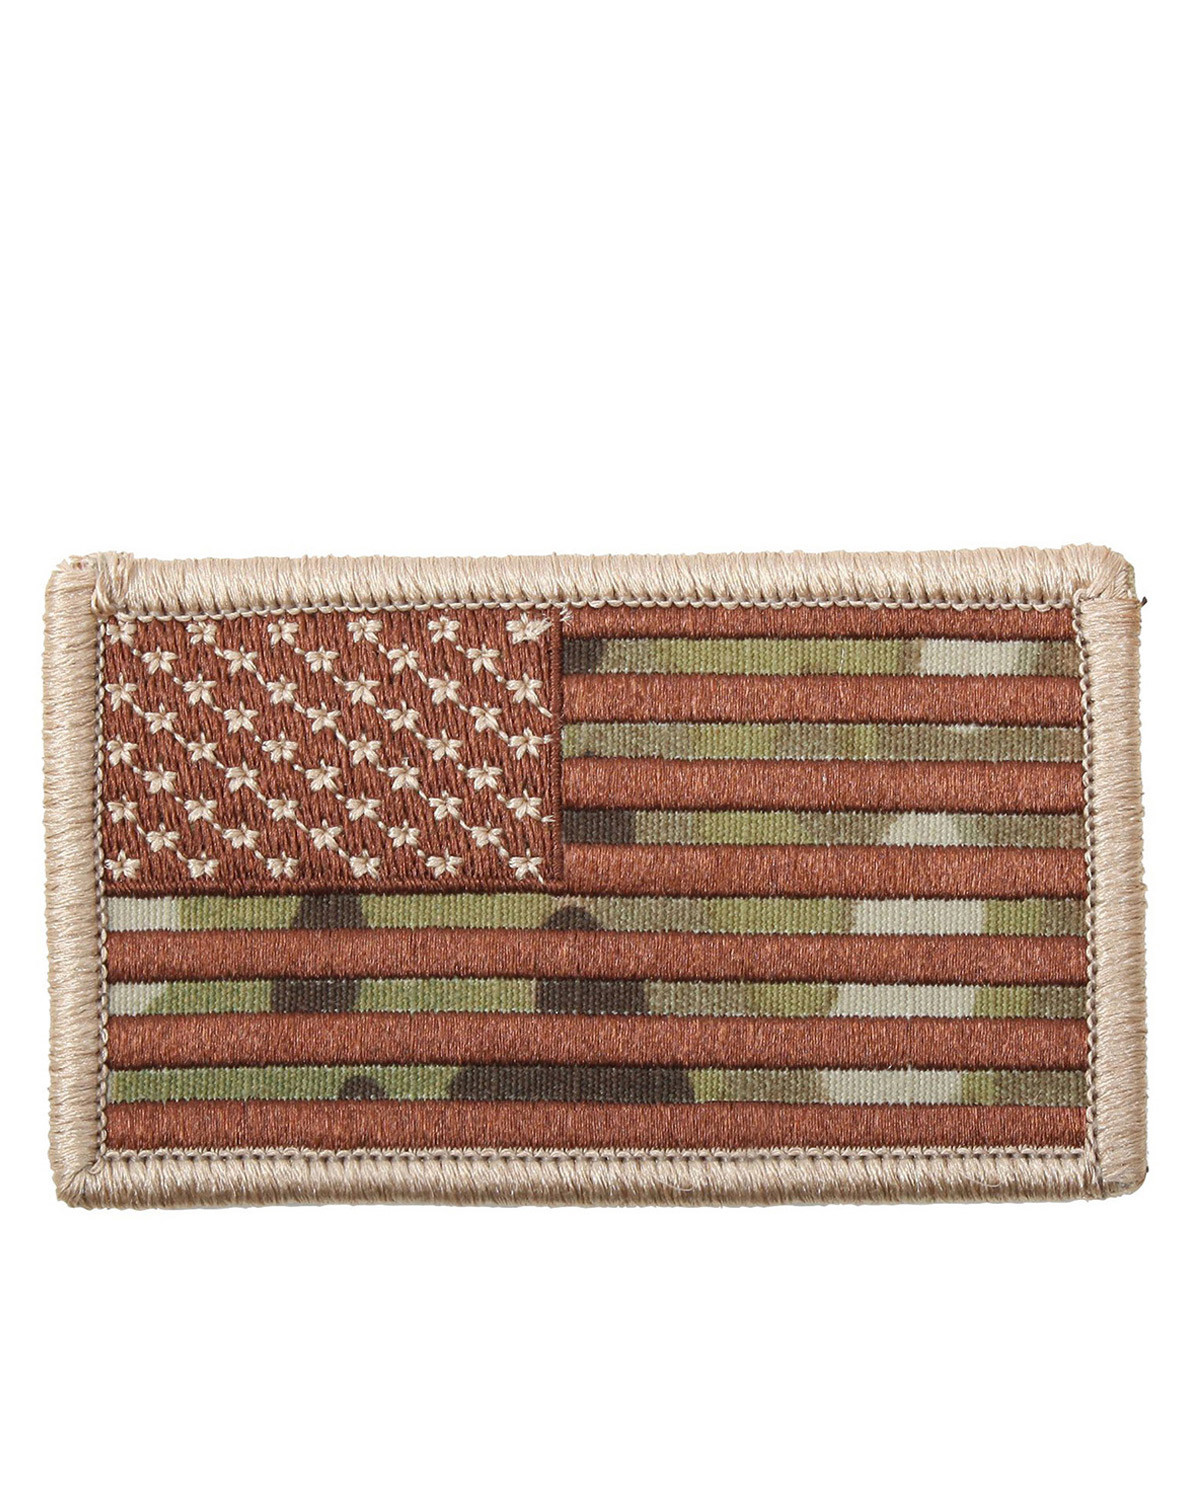 9: Rothco American Flag Patch (Multicam, One Size)